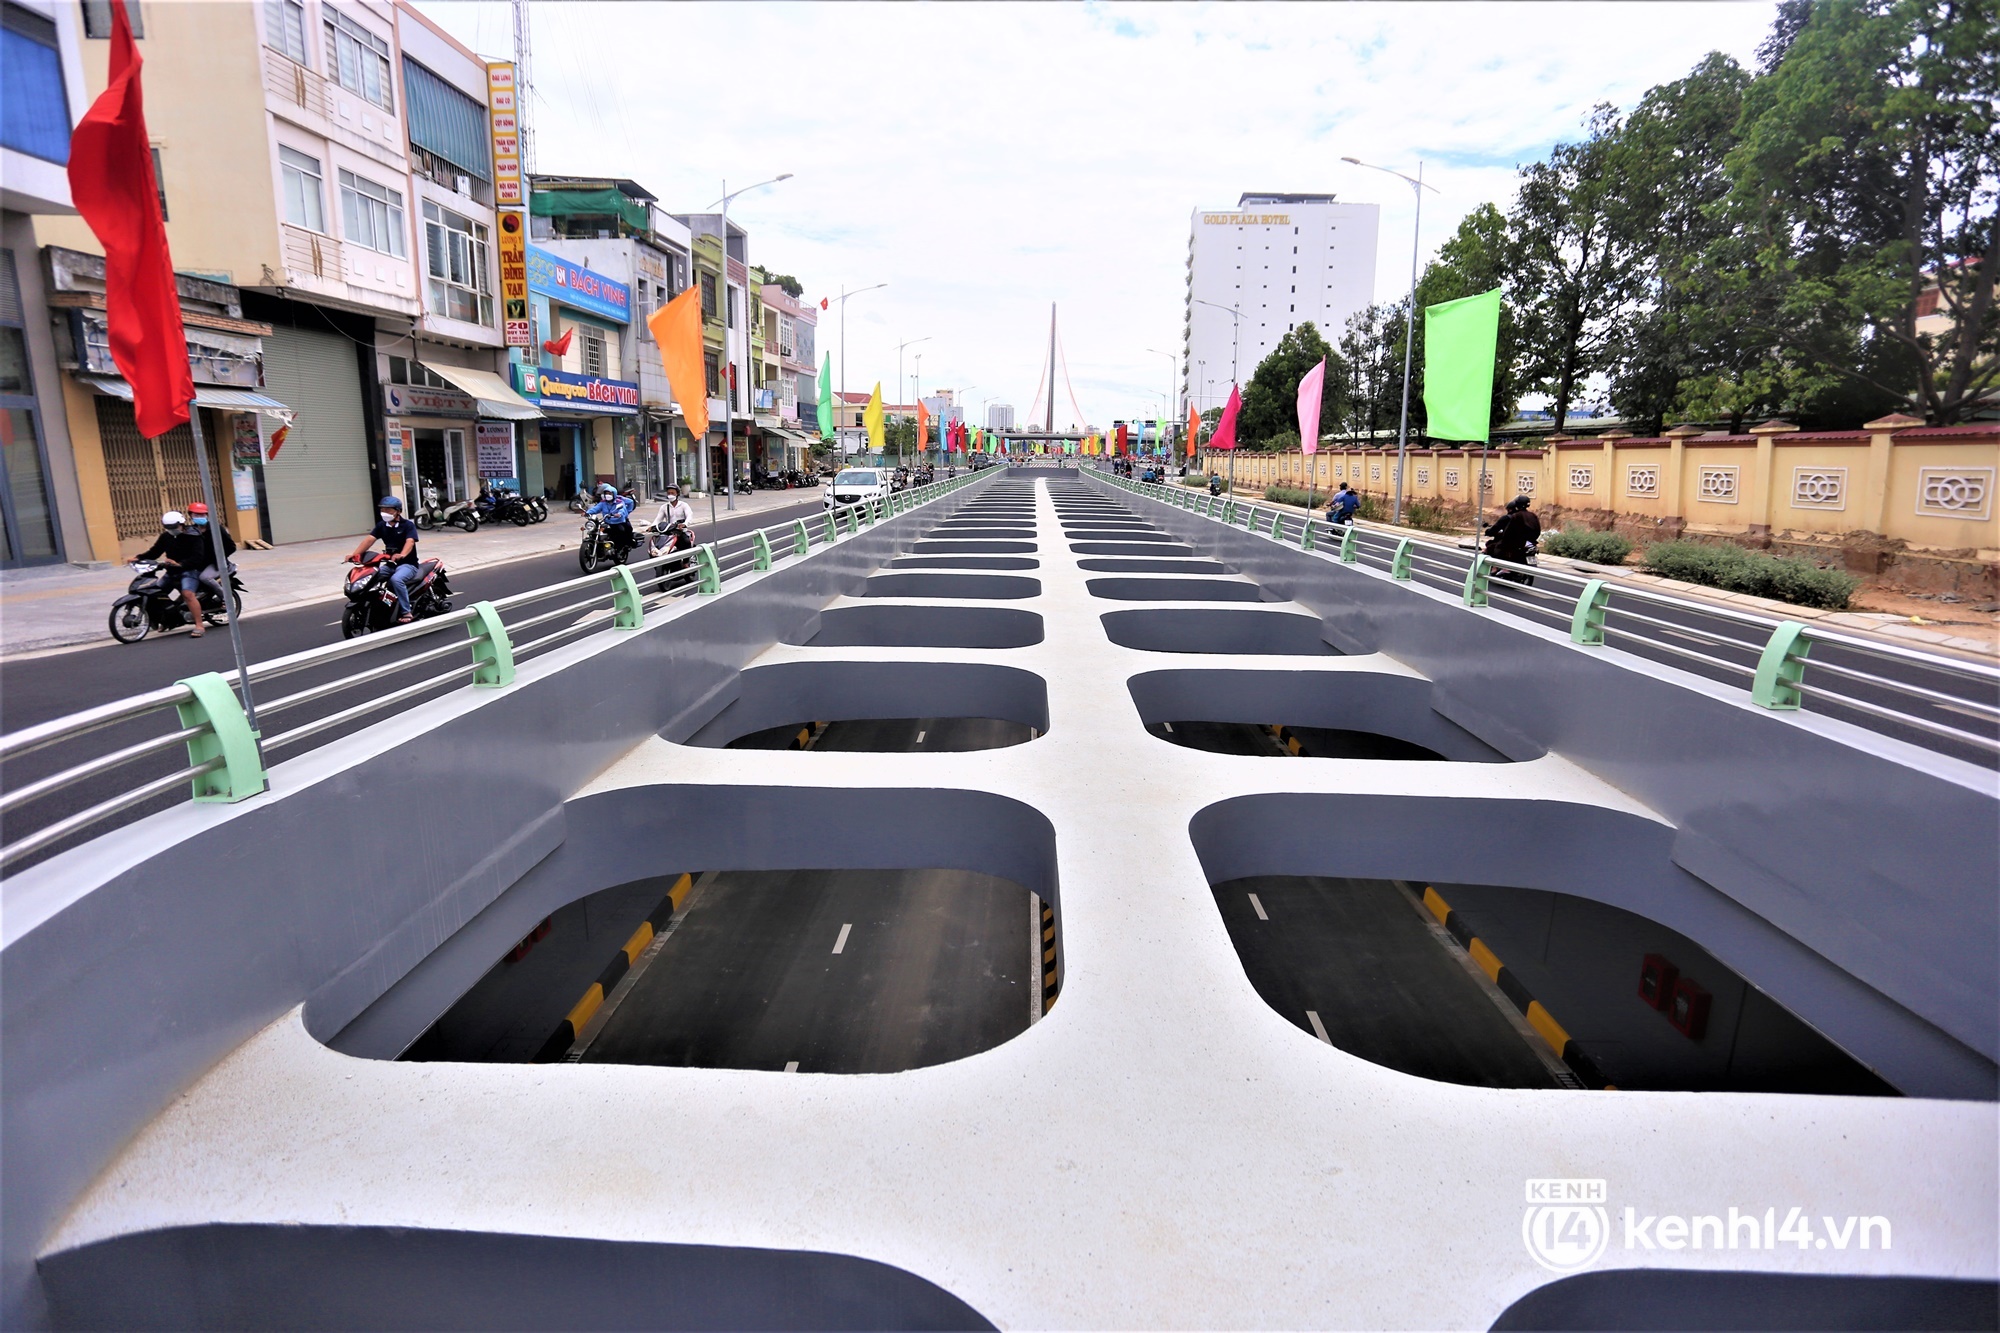 Da Nang inaugurated a 3-storey intersection with more than VND 720 billion with a very unique open-air tunnel - Photo 5.